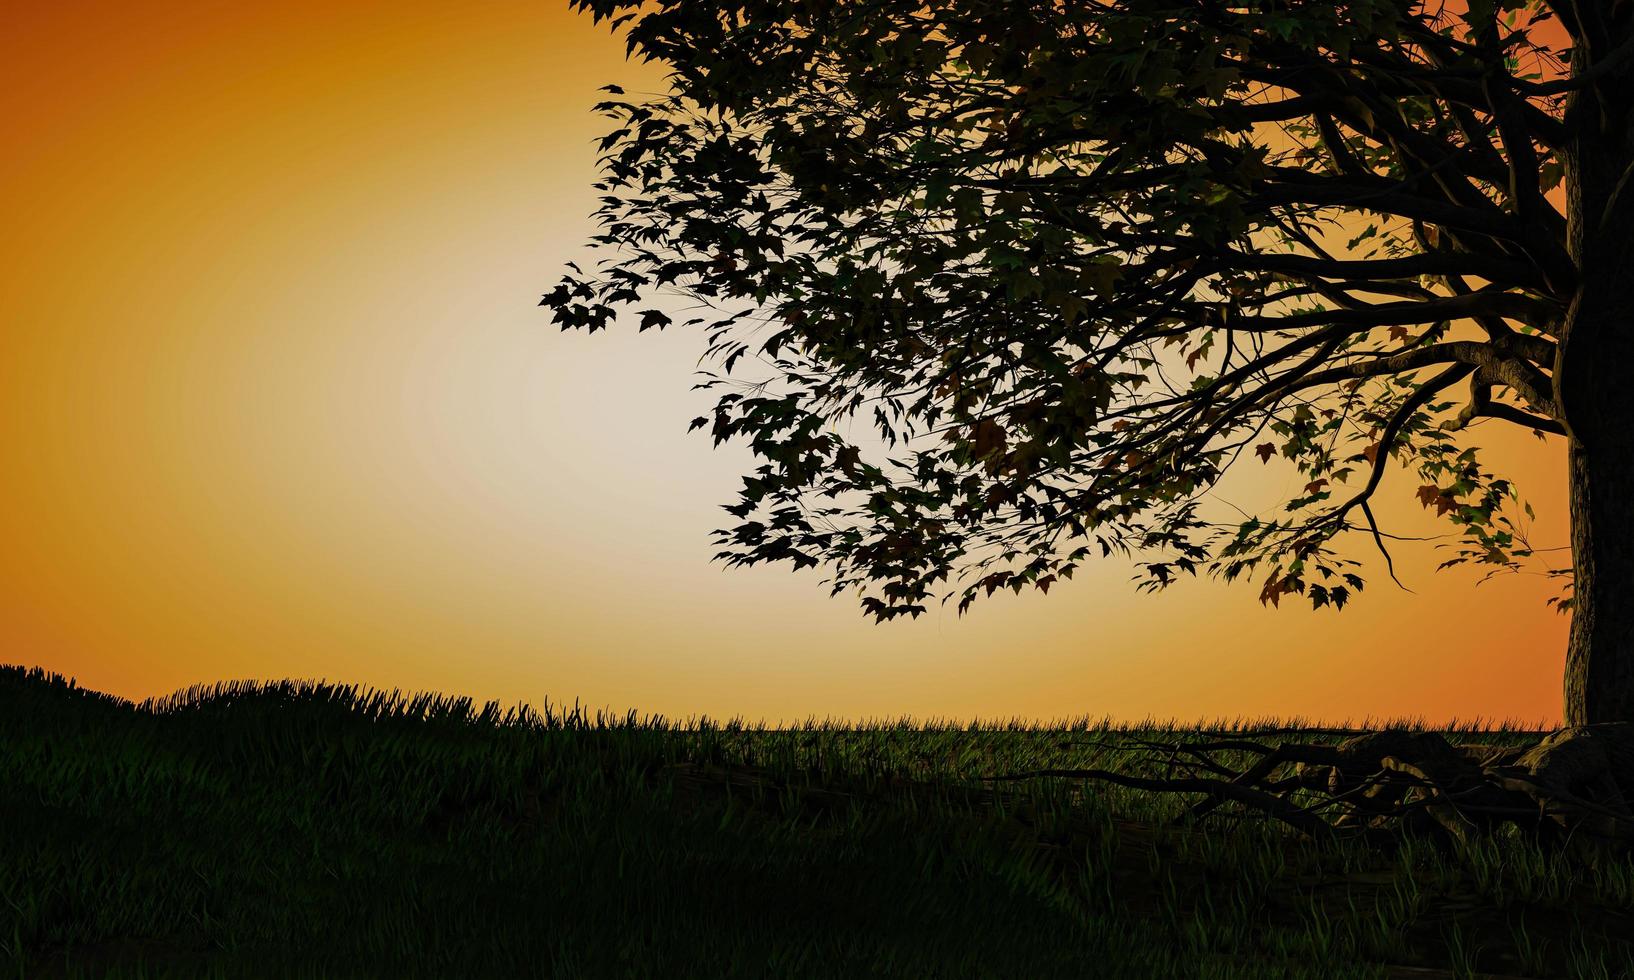 Silhouette of a big tree on the grass. Background in bright orange white tones representing the evening sun. 3D Rendering photo